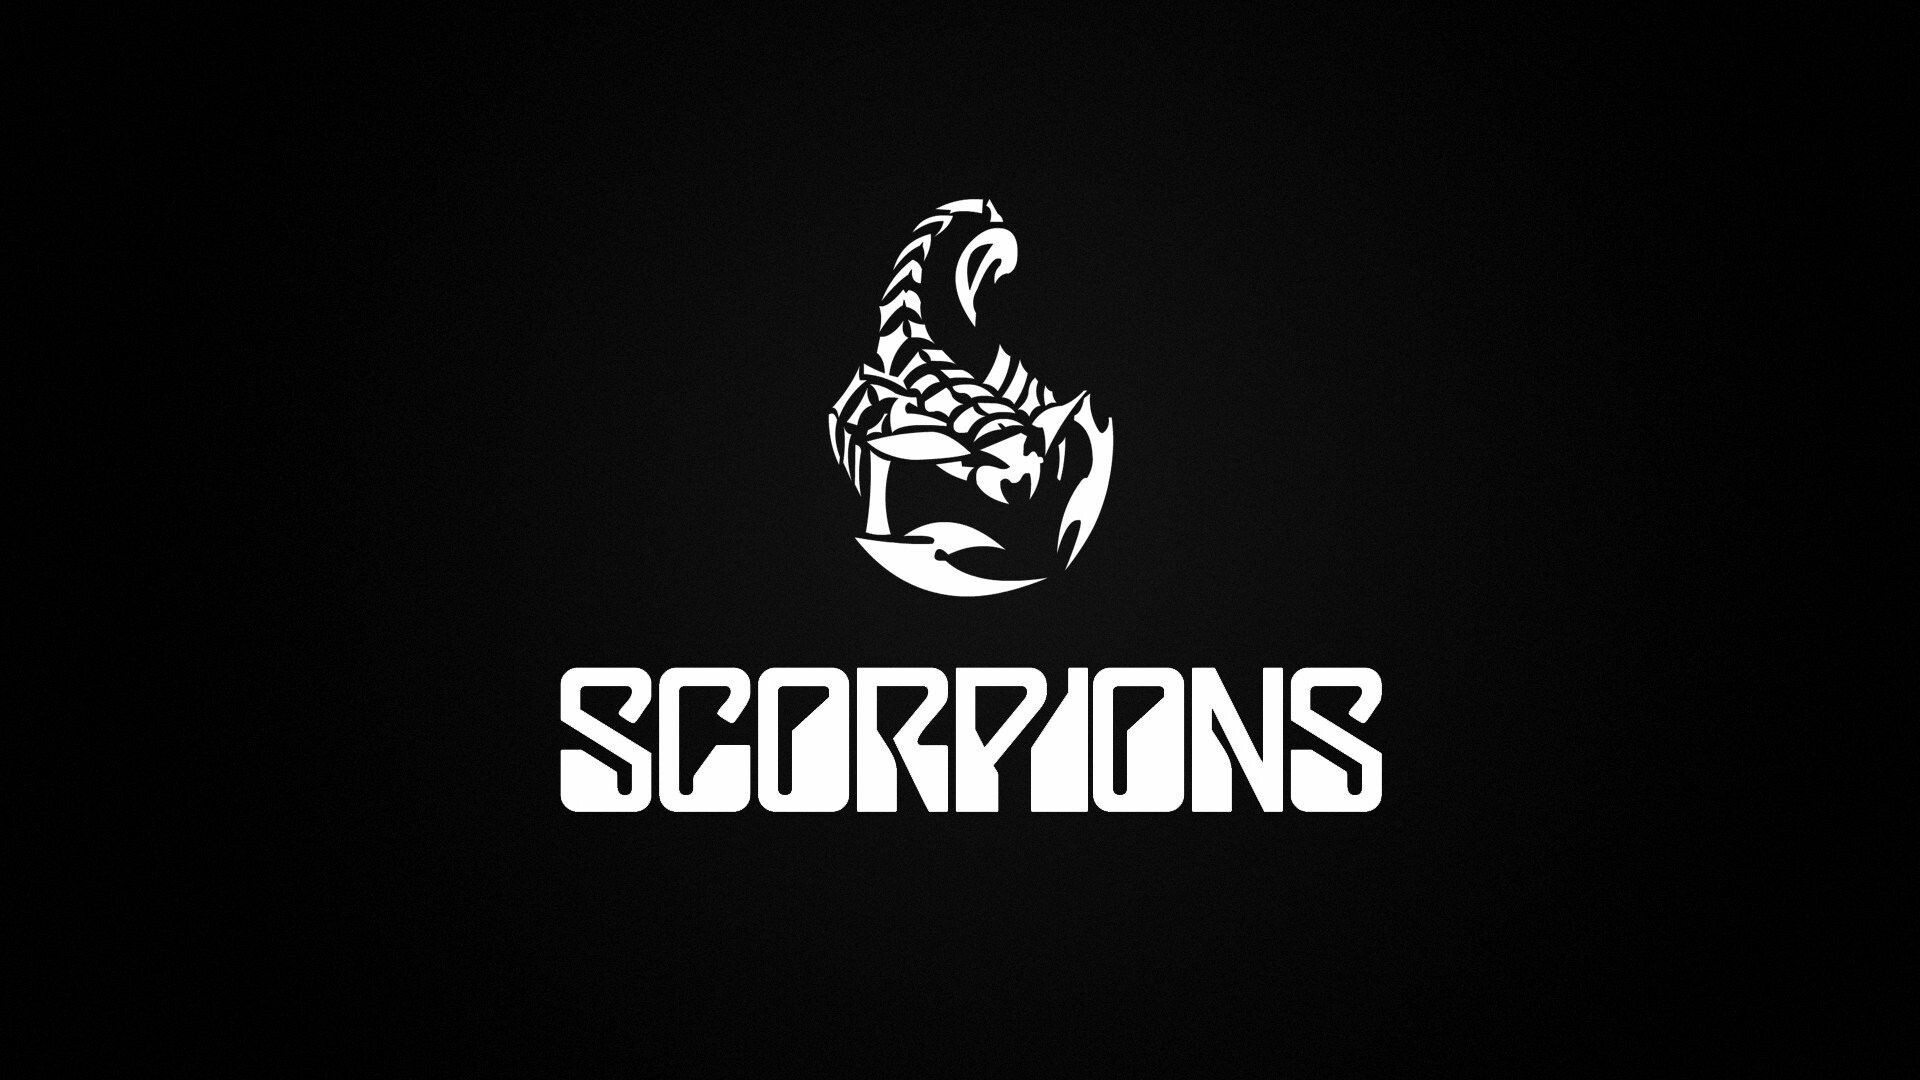 Scorpions: German band who blew in with the first wave of '70s heavy metal, then stuck around for decades while unleashing many a classic anthem. 1920x1080 Full HD Wallpaper.